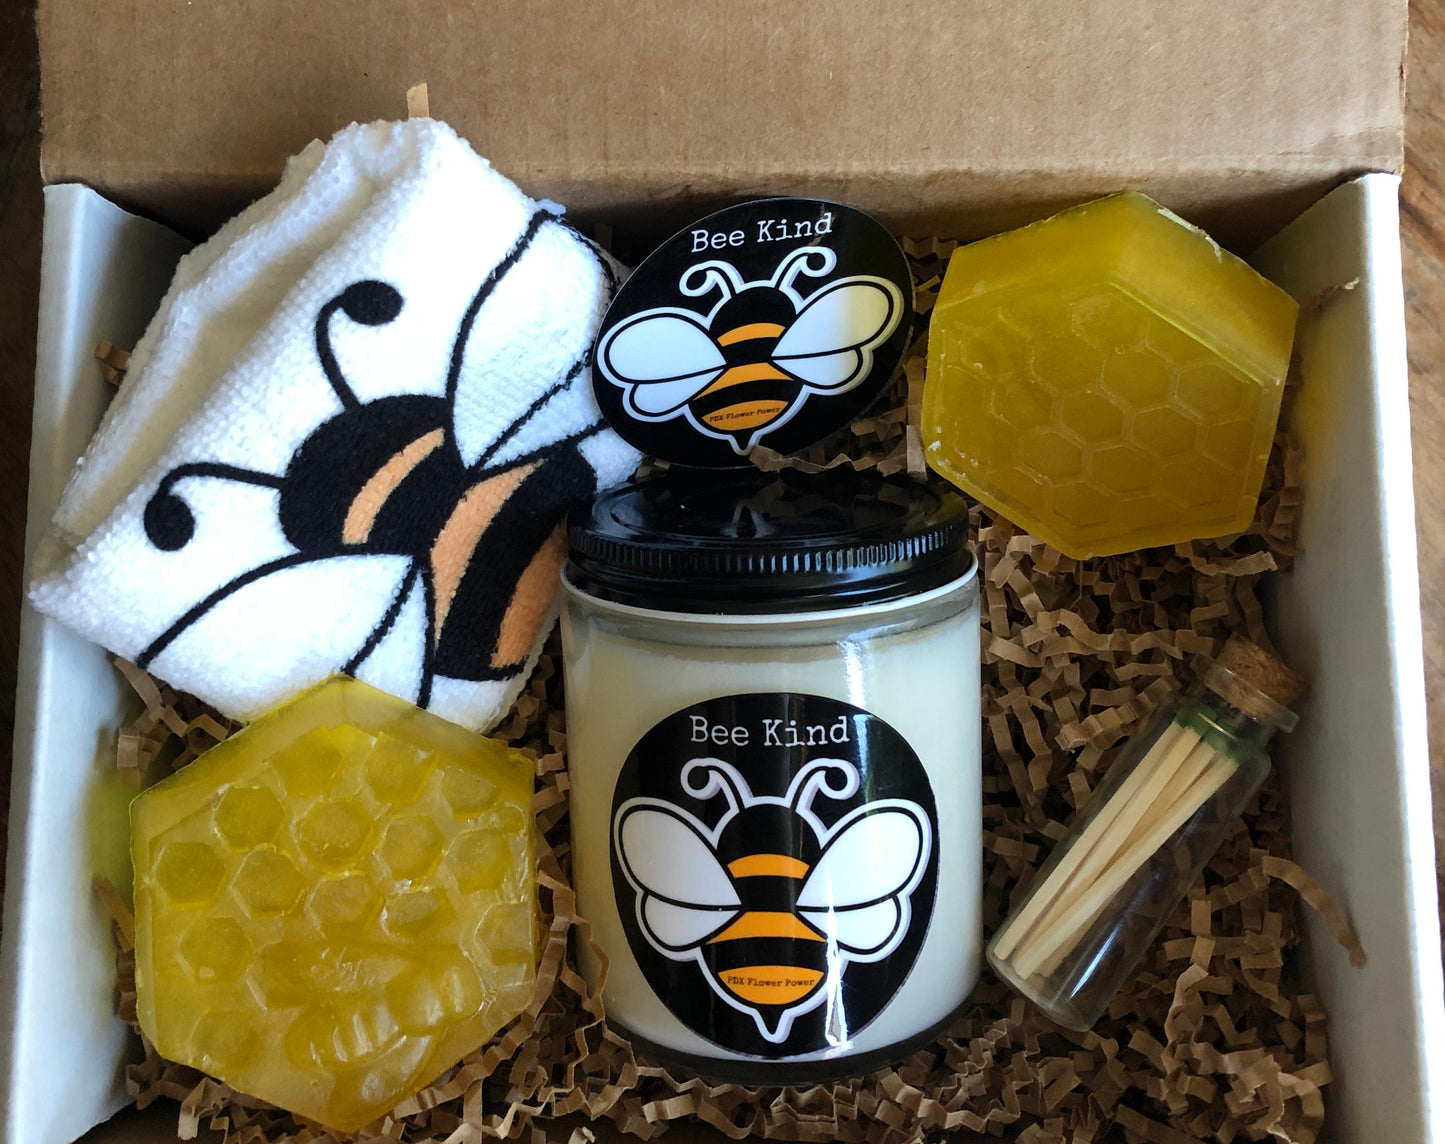 PDX Flower Power "Bee Kind Gift set", Bee themed gift set, Bee kind Candle, Bee kind Soaps, Bee sticker. Bee kind wash cloth, cute matches